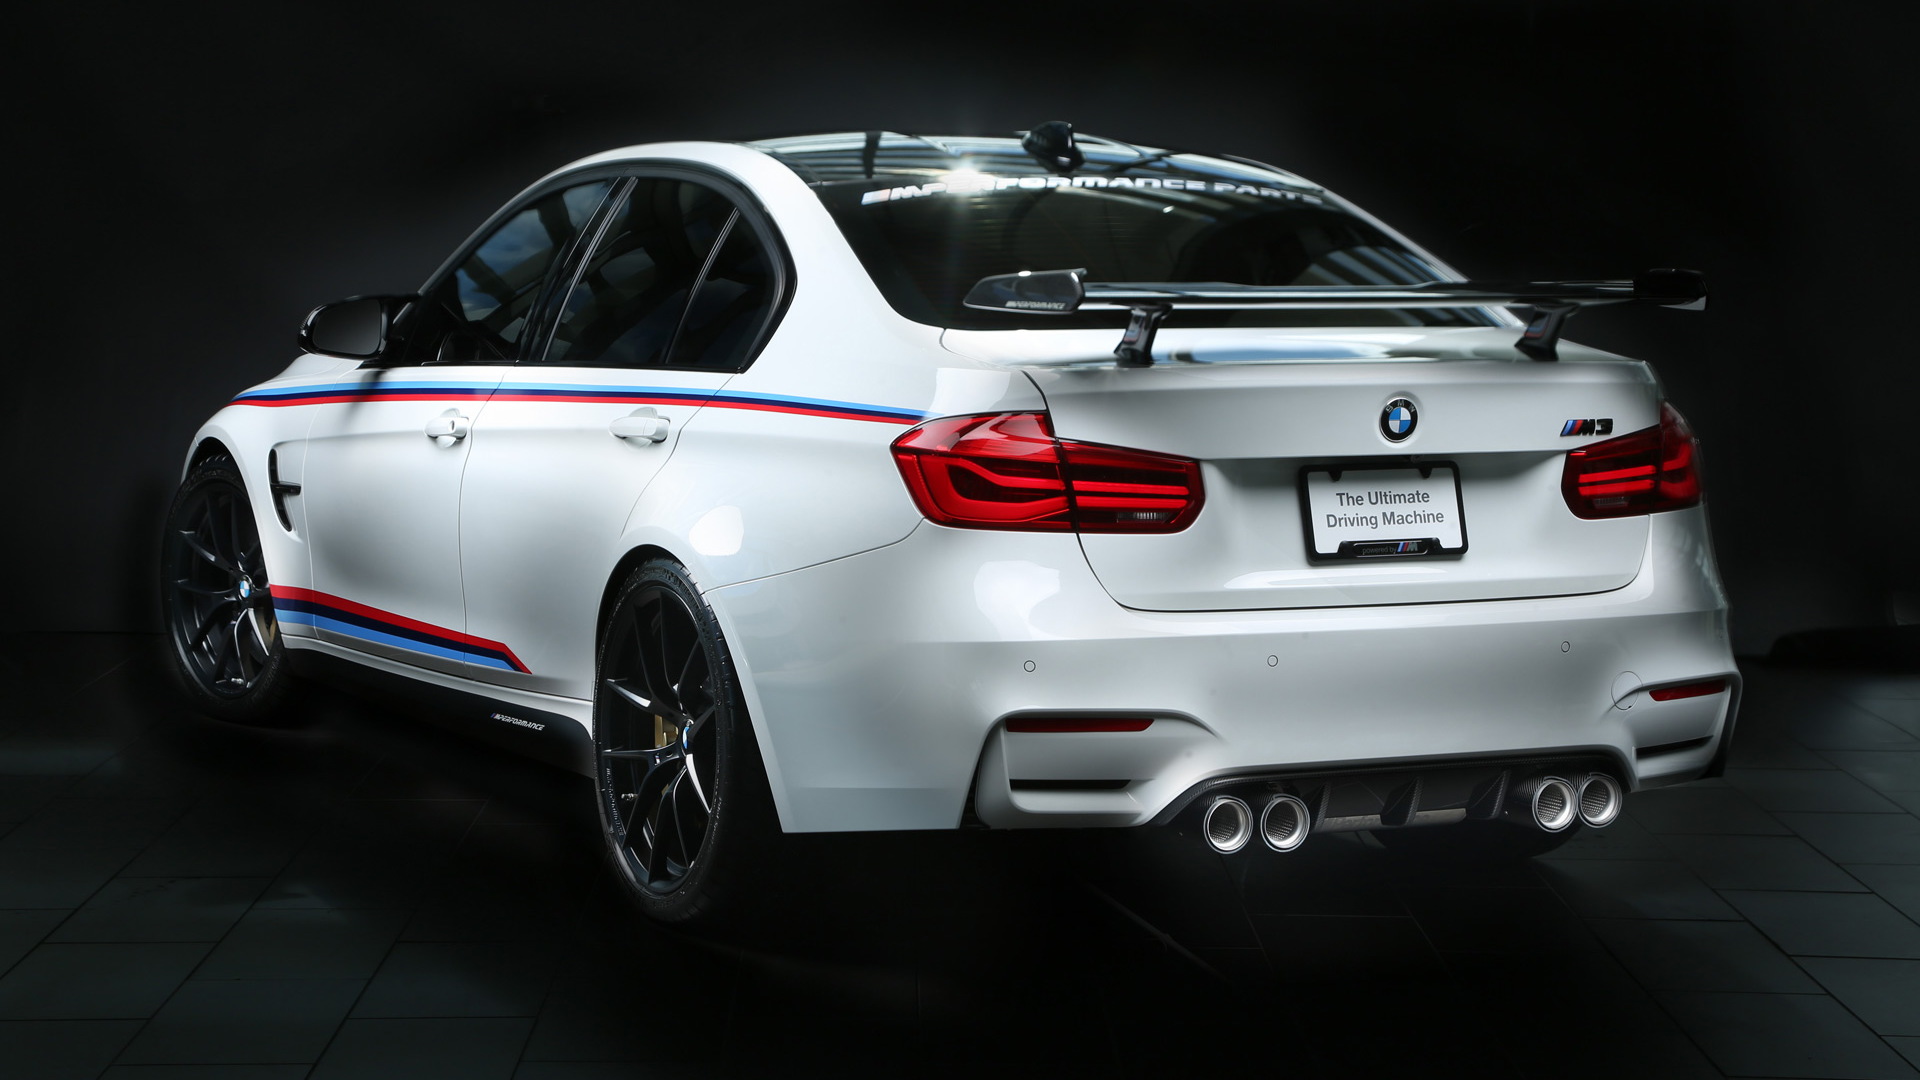 BMW M3 equipped with M Performance parts, 2016 SEMA show